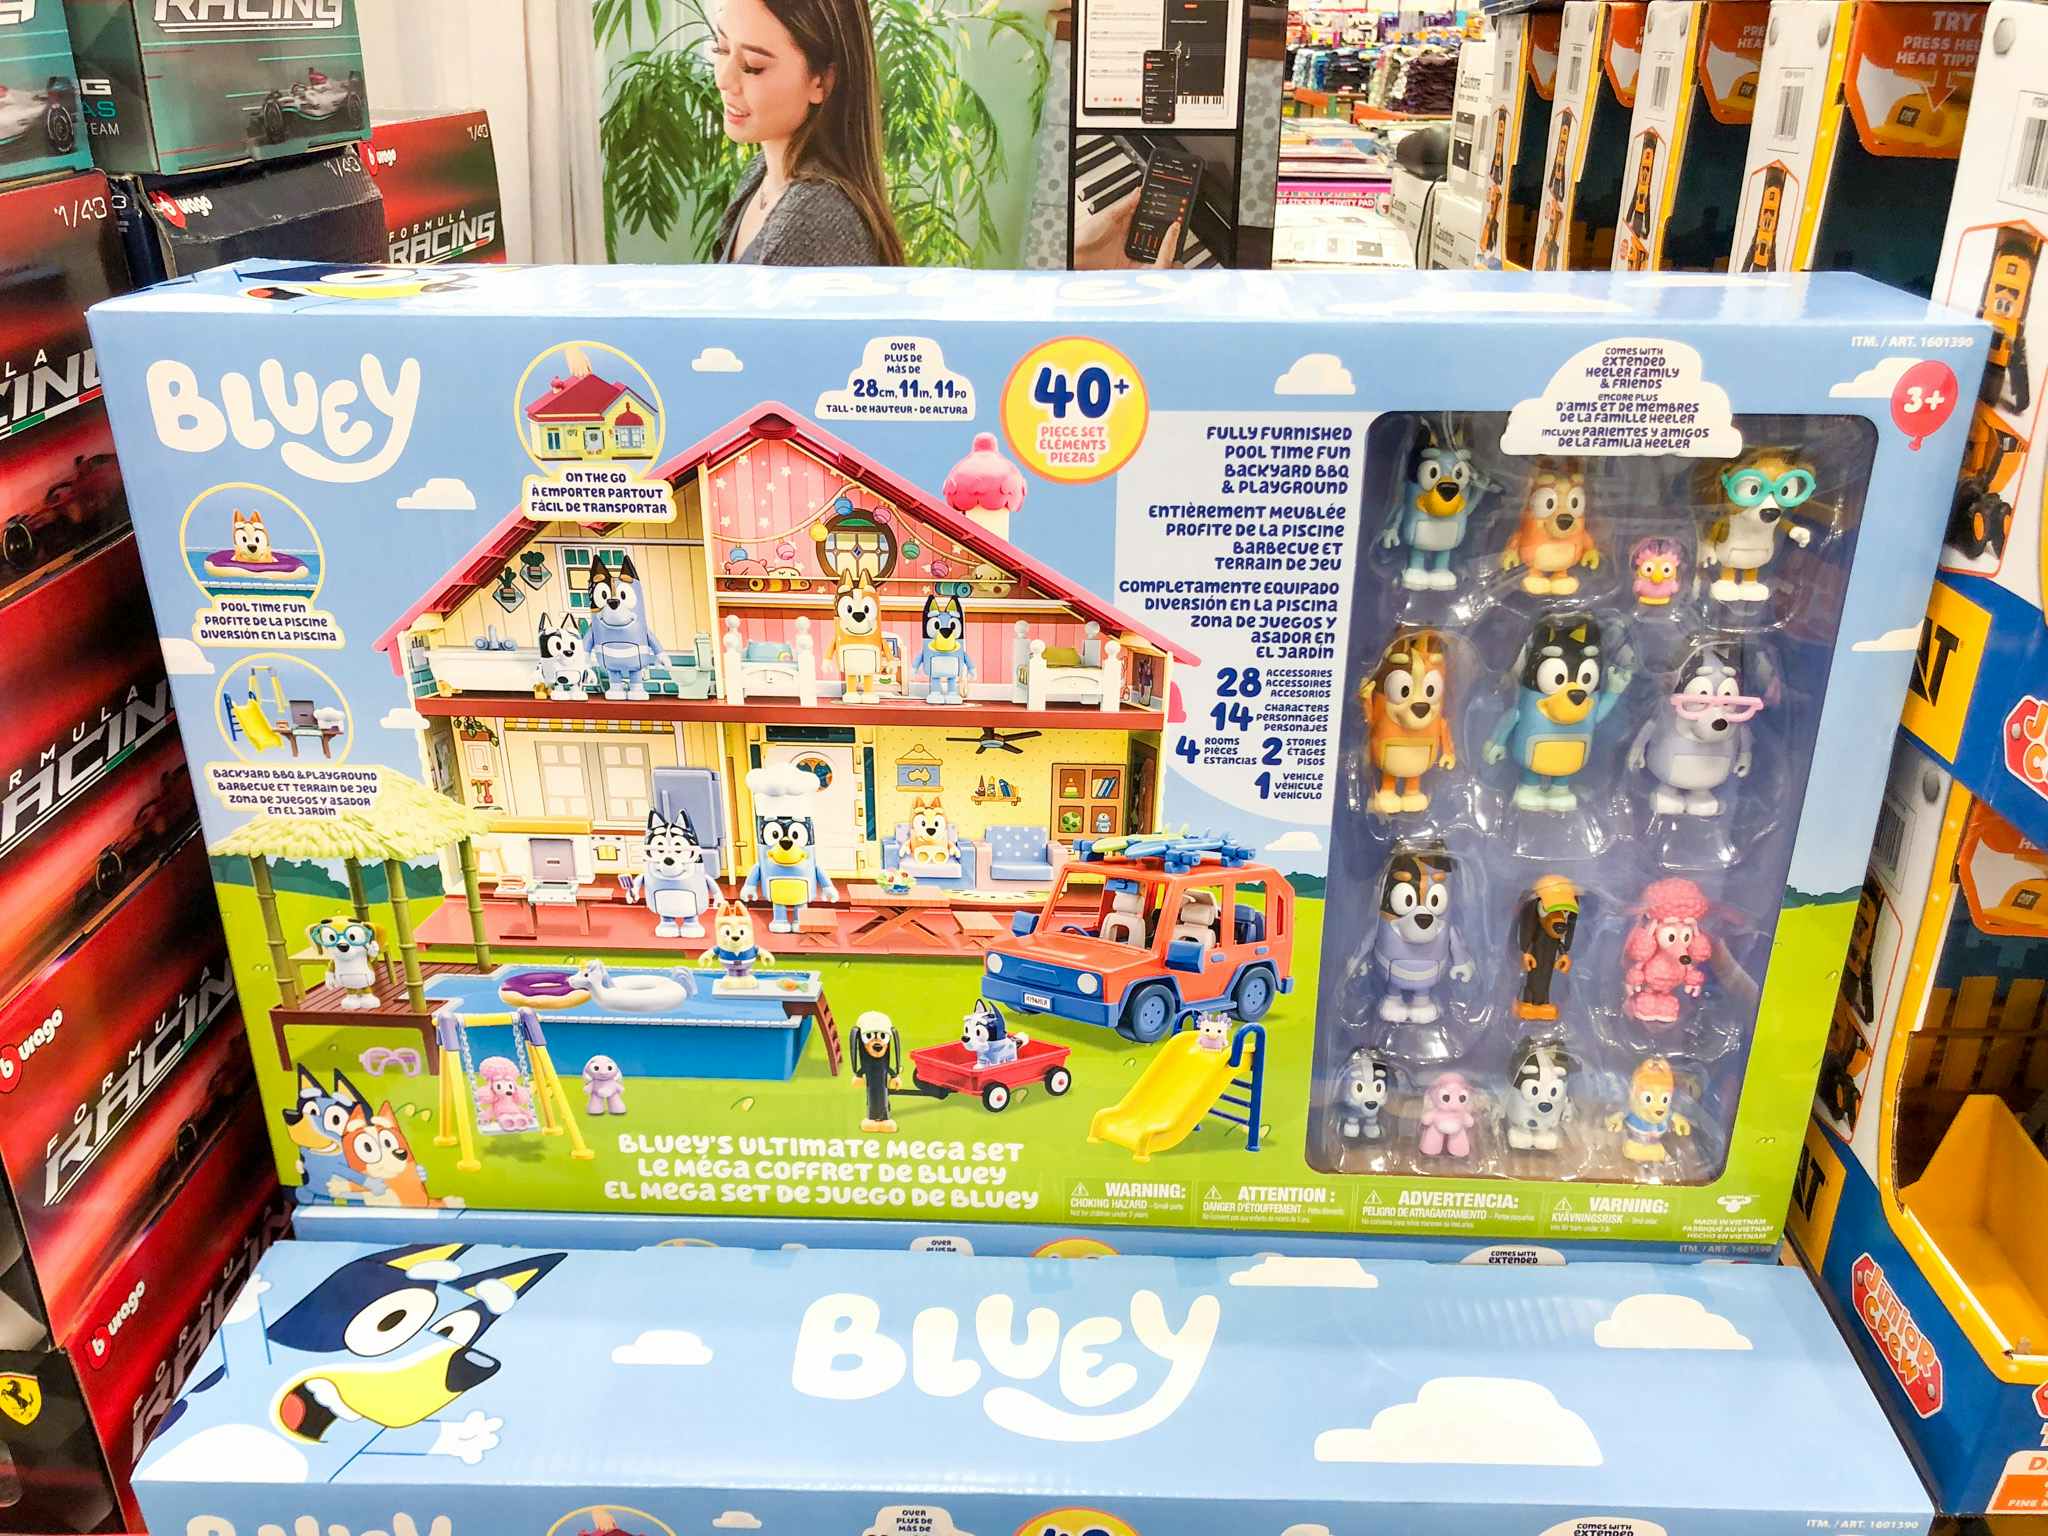 Bluey Ultimate Playground Exclusive Figures and Accessories Set